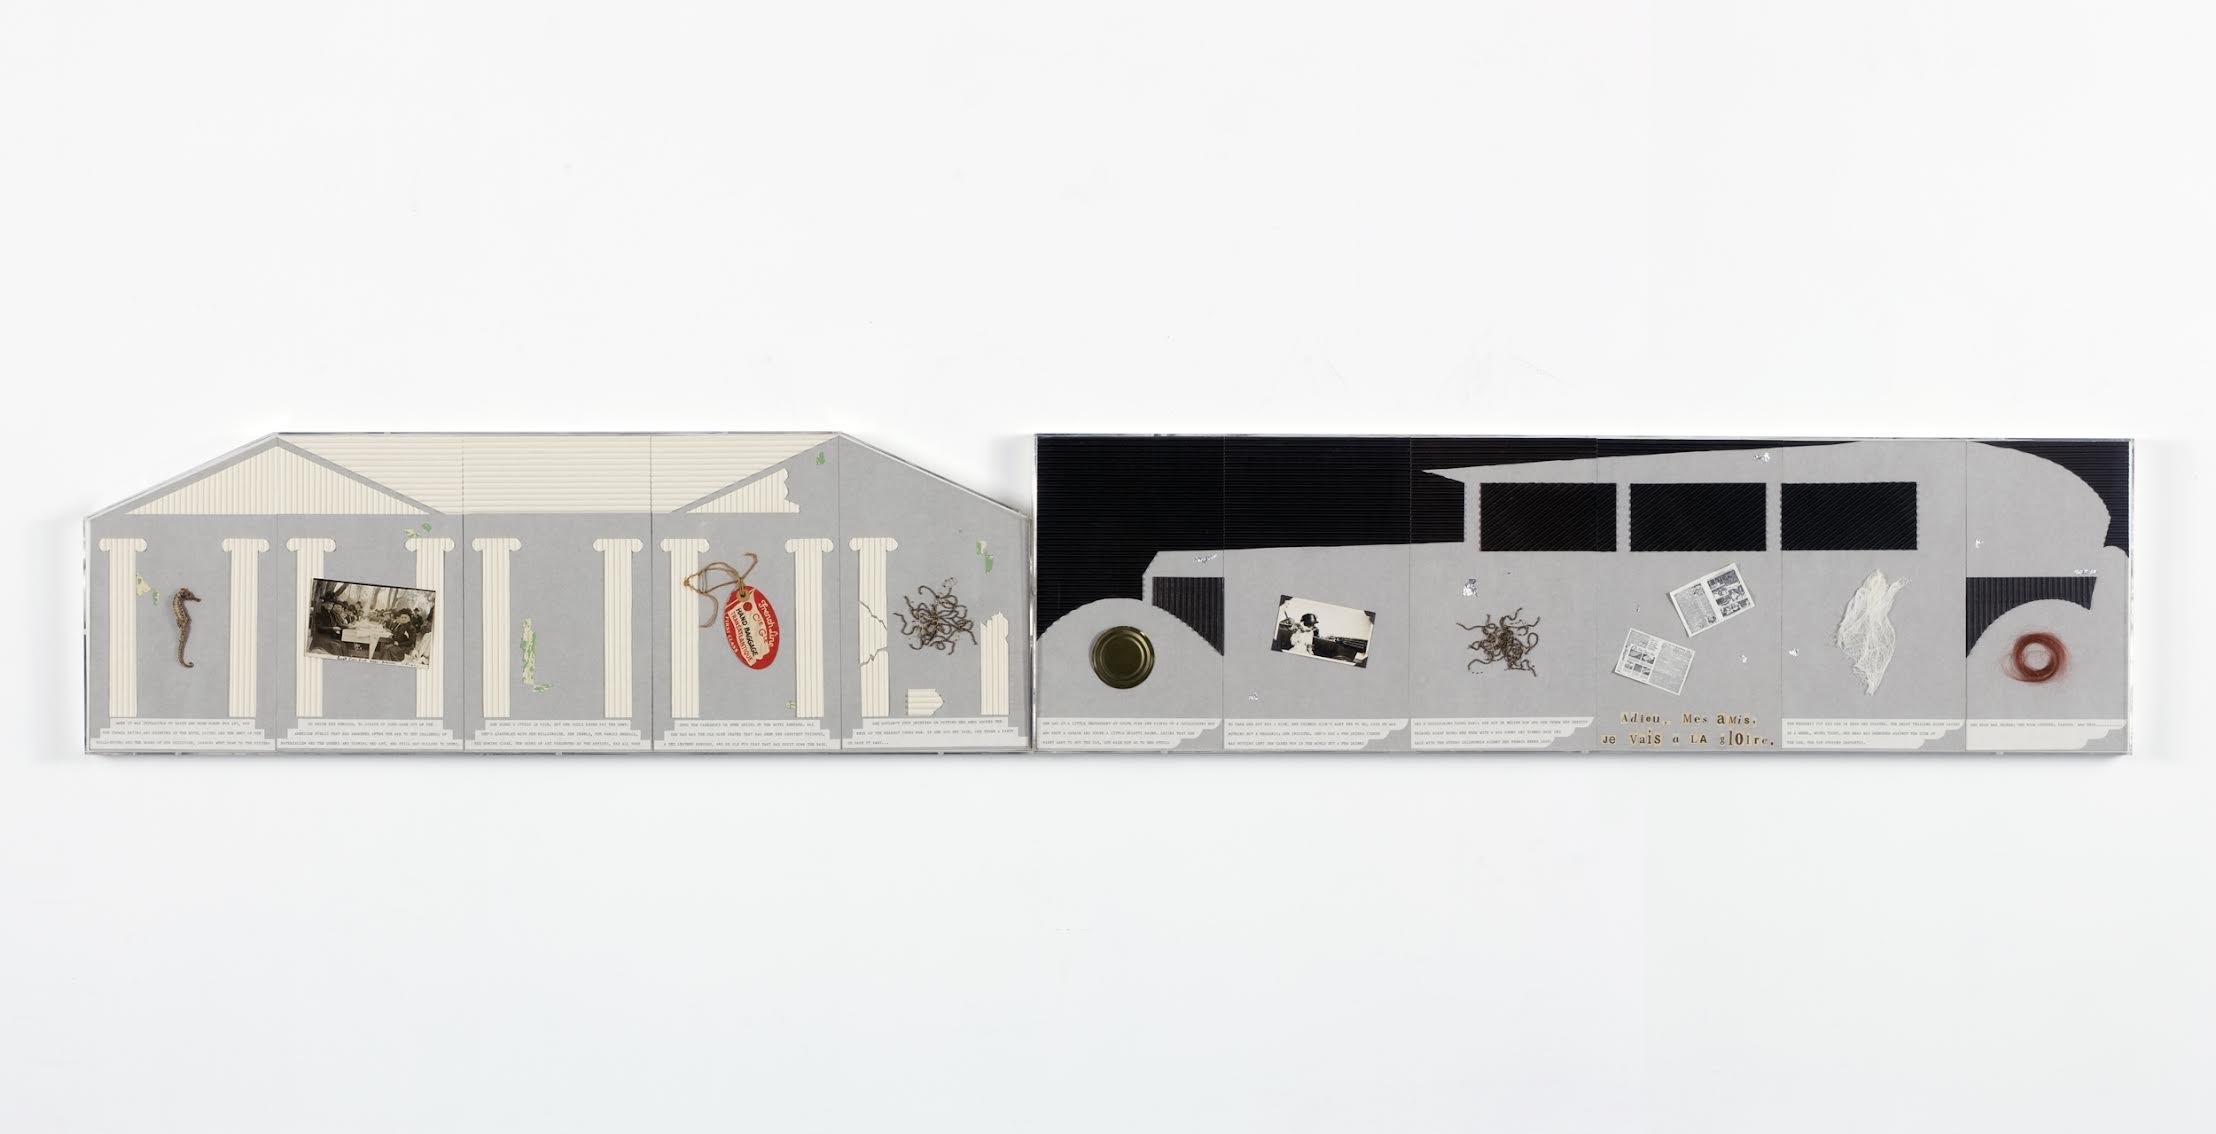  Alexis Smith,  Isadora,  1980—1981. Mixed-media collage (two panels) over painted backdrop of corrugated paper. 120 x 144 x 1 ½ inches; Panel dimensions: 14&nbsp;⅓&nbsp;x 41 ½ inches; 14&nbsp;⅛&nbsp;x 48 ¾ inches; Backdrop dimensions: 10 x 12 ft. [d